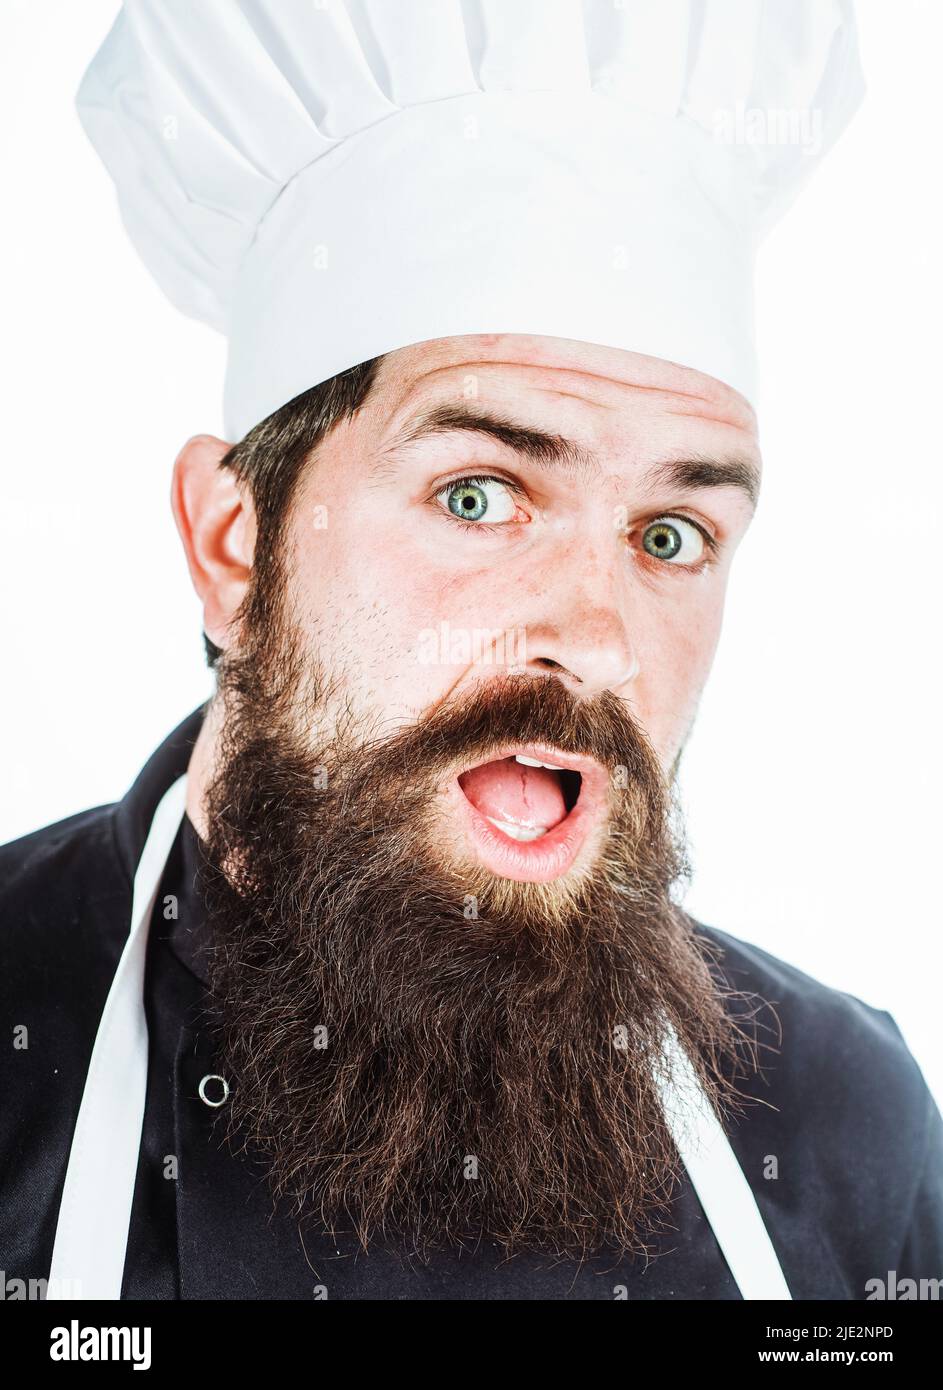 Surprised Bearded Chef In Uniform Cooking Emotions Portrait Of Professional Male Cook Or 